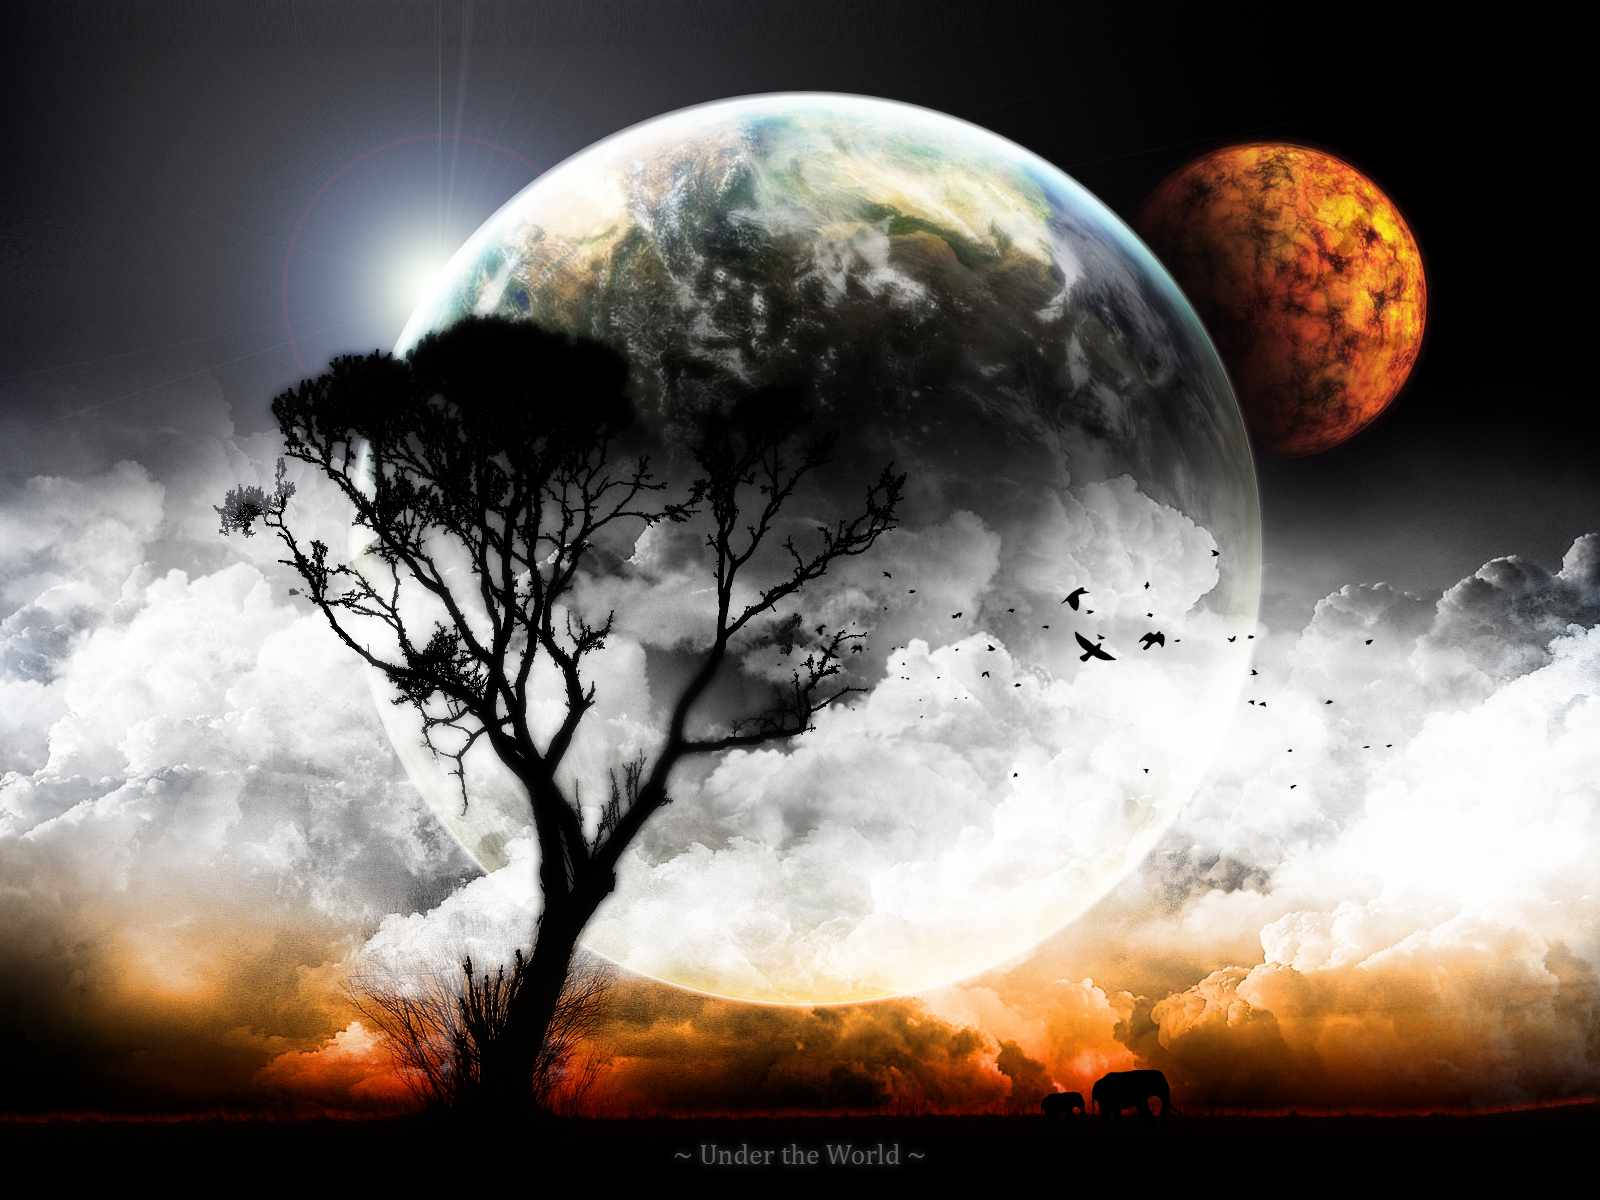 Cool Art Of Moon And Tree